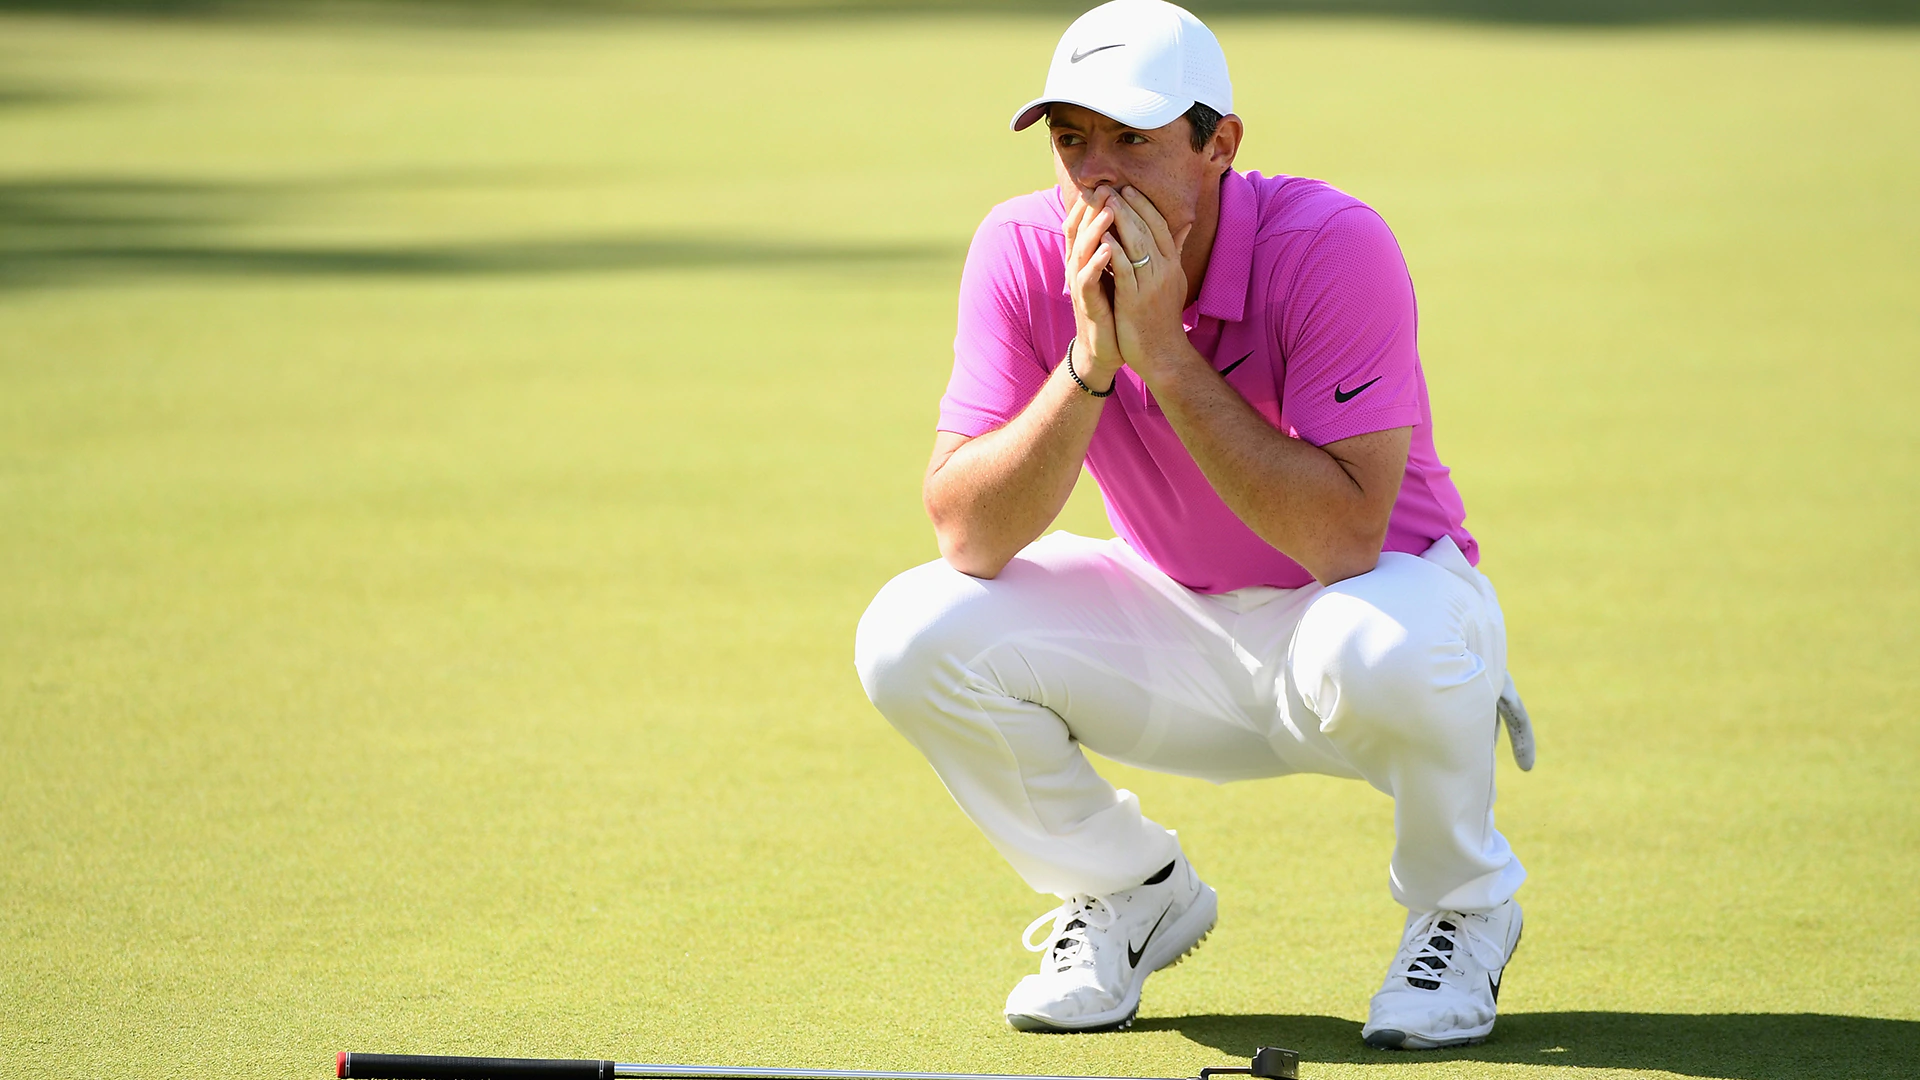 Runner-up McIlroy: 'I should have closed it out'